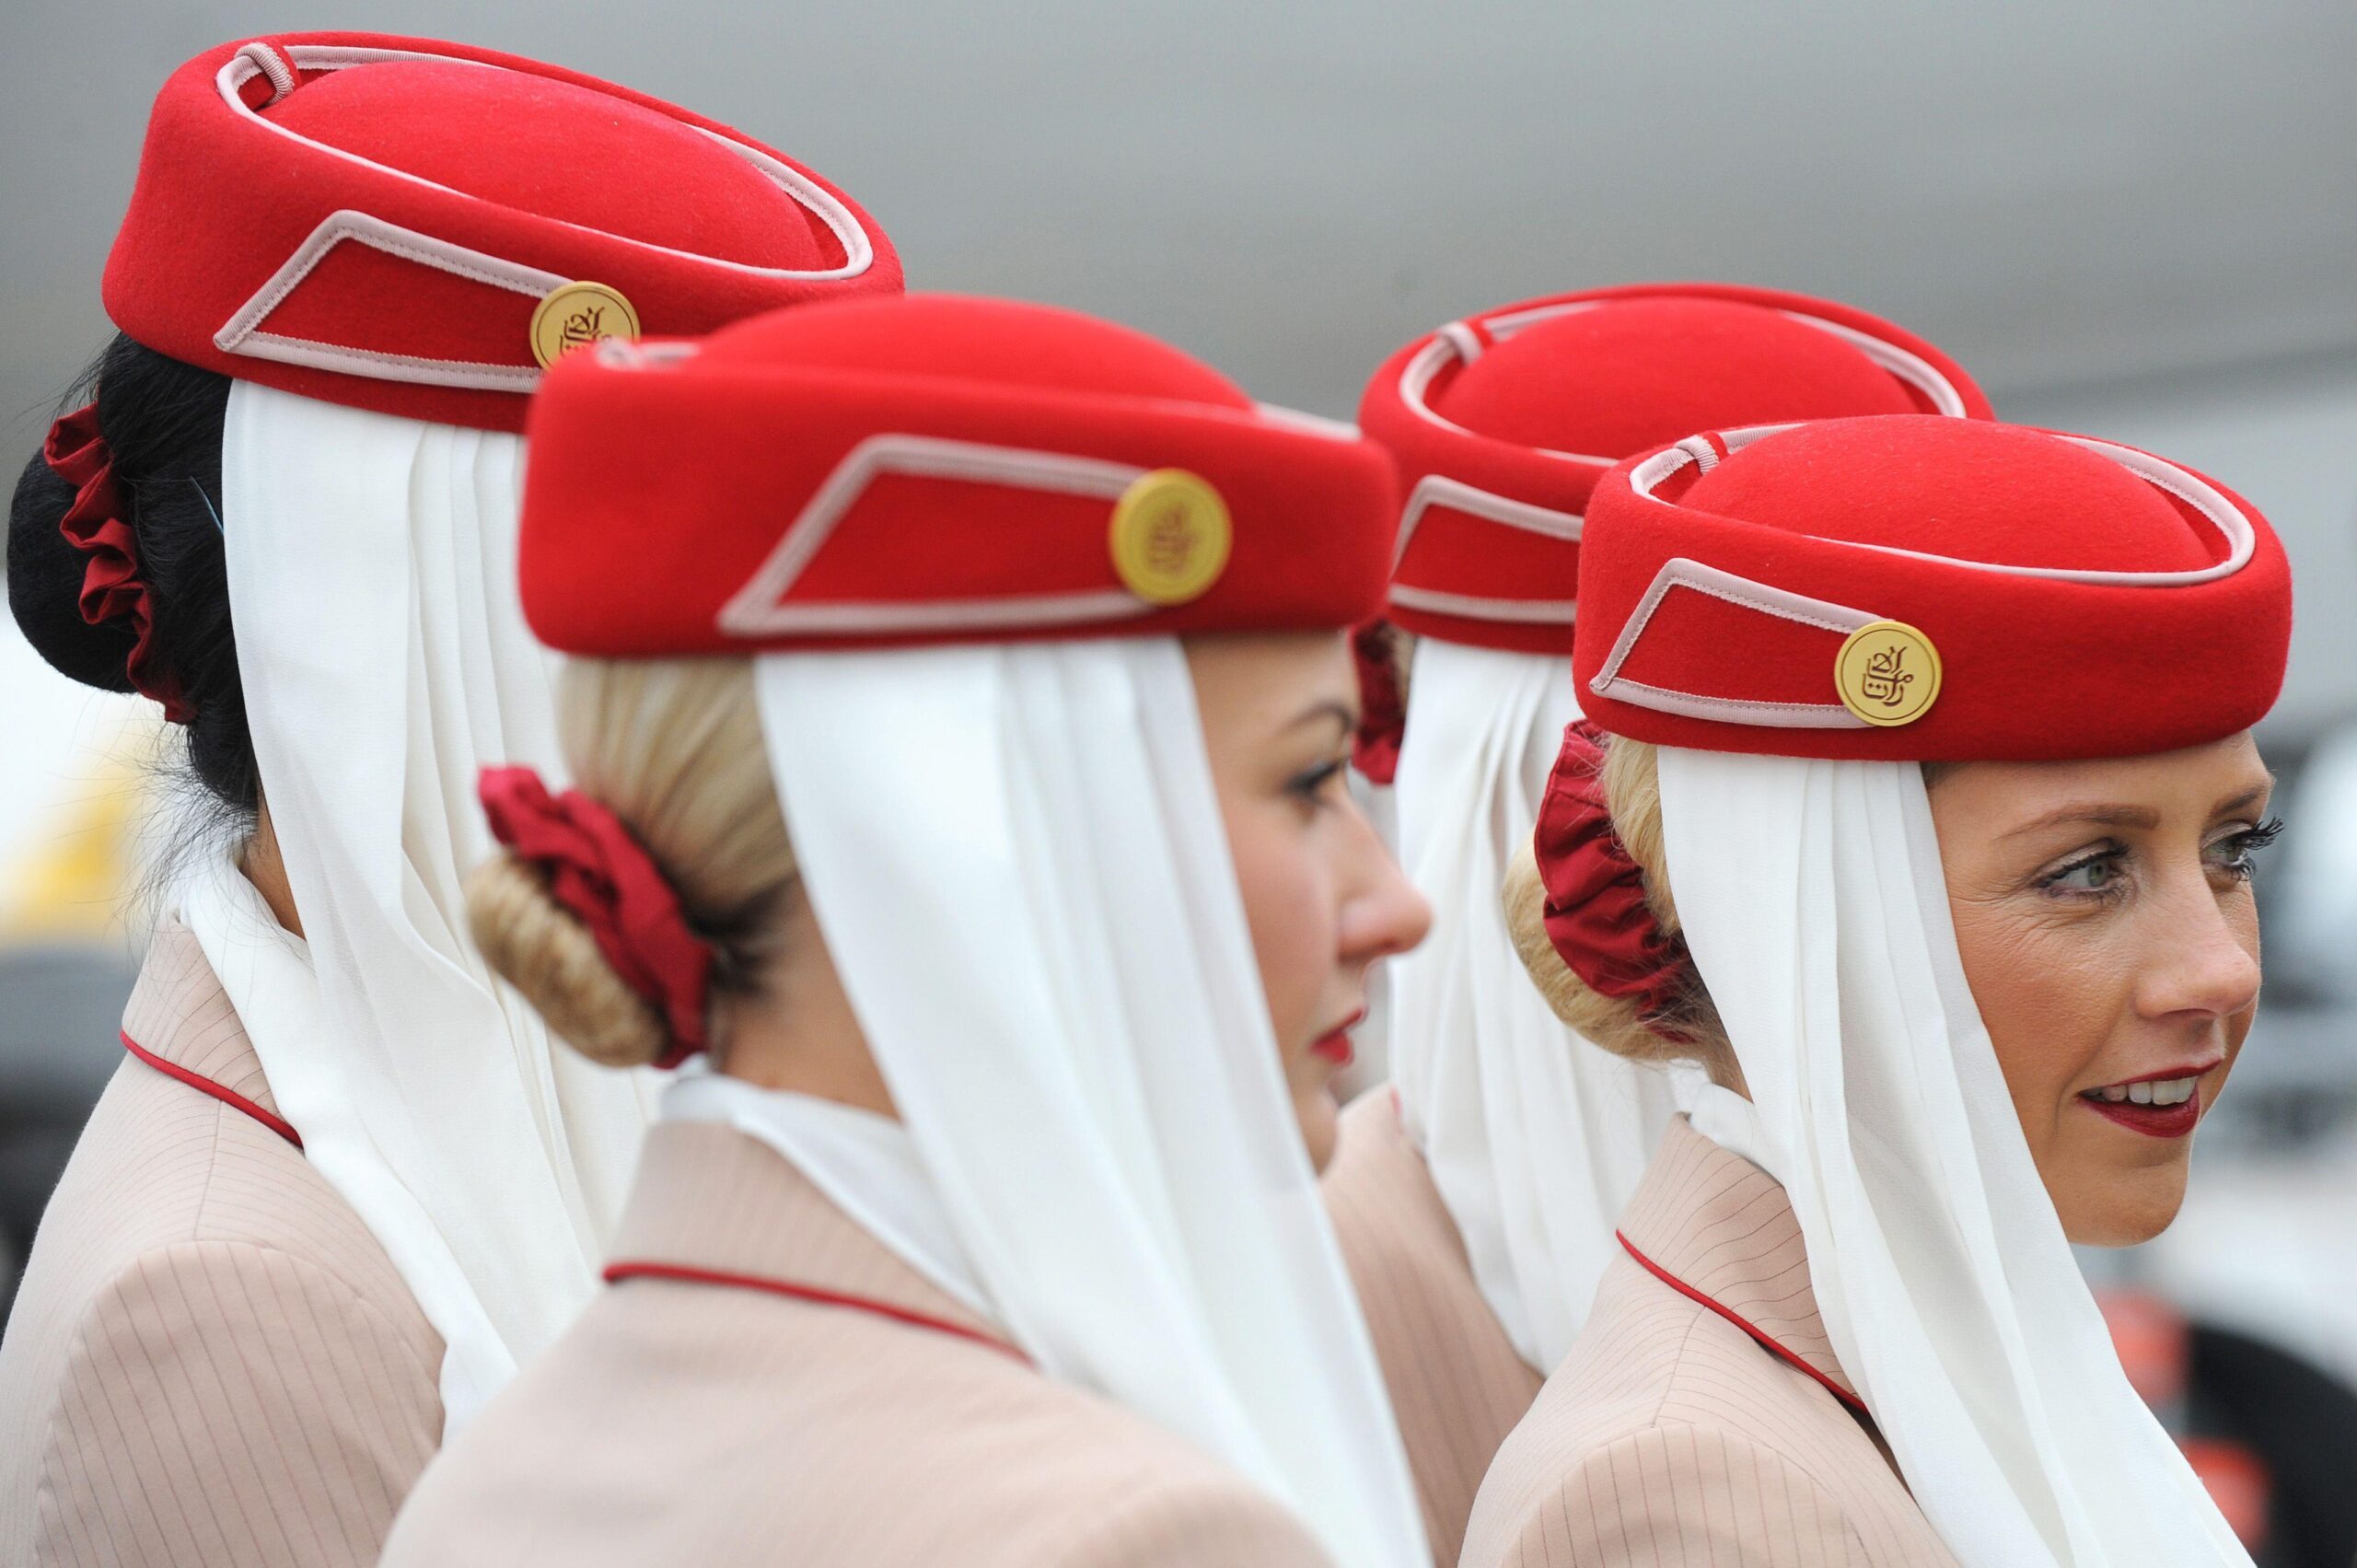 Emirates Airline cabin crew. The Investment Corporation of Dubai owns the airline and has a significant stake in Dubai's biggest bank Emirates NBD